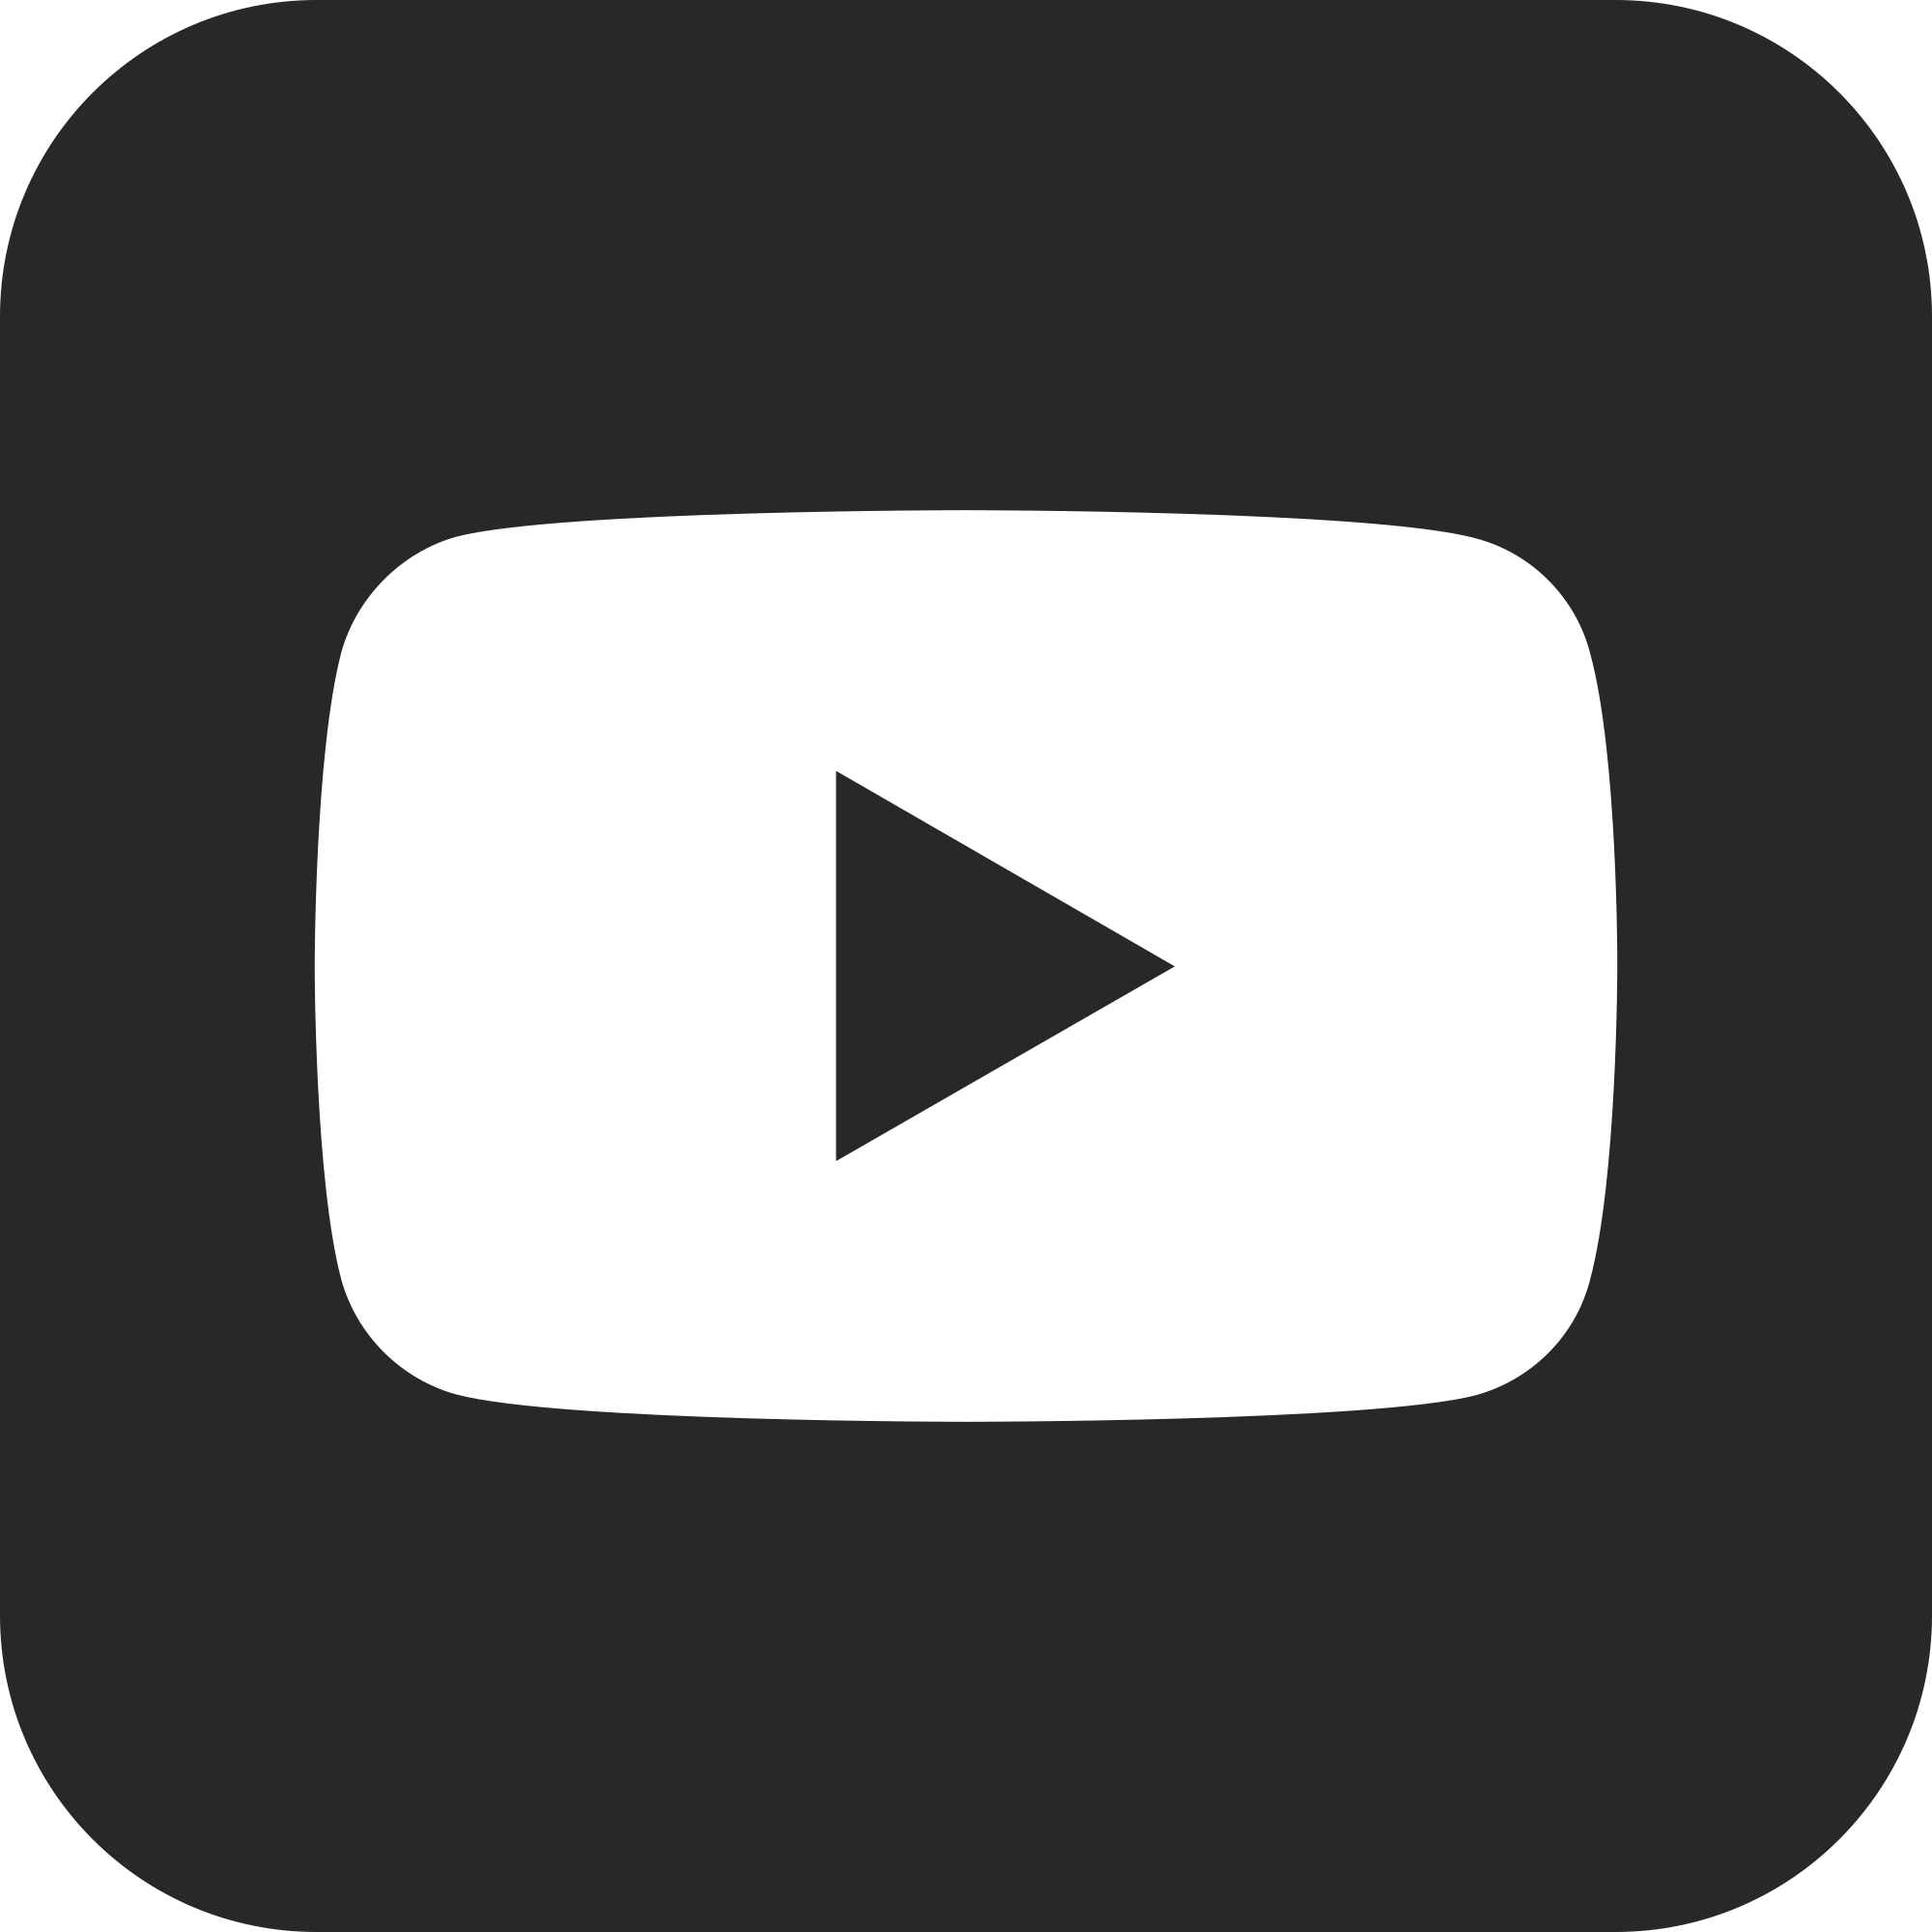 Download Black And Grey Aesthetic Youtube Logo Pics